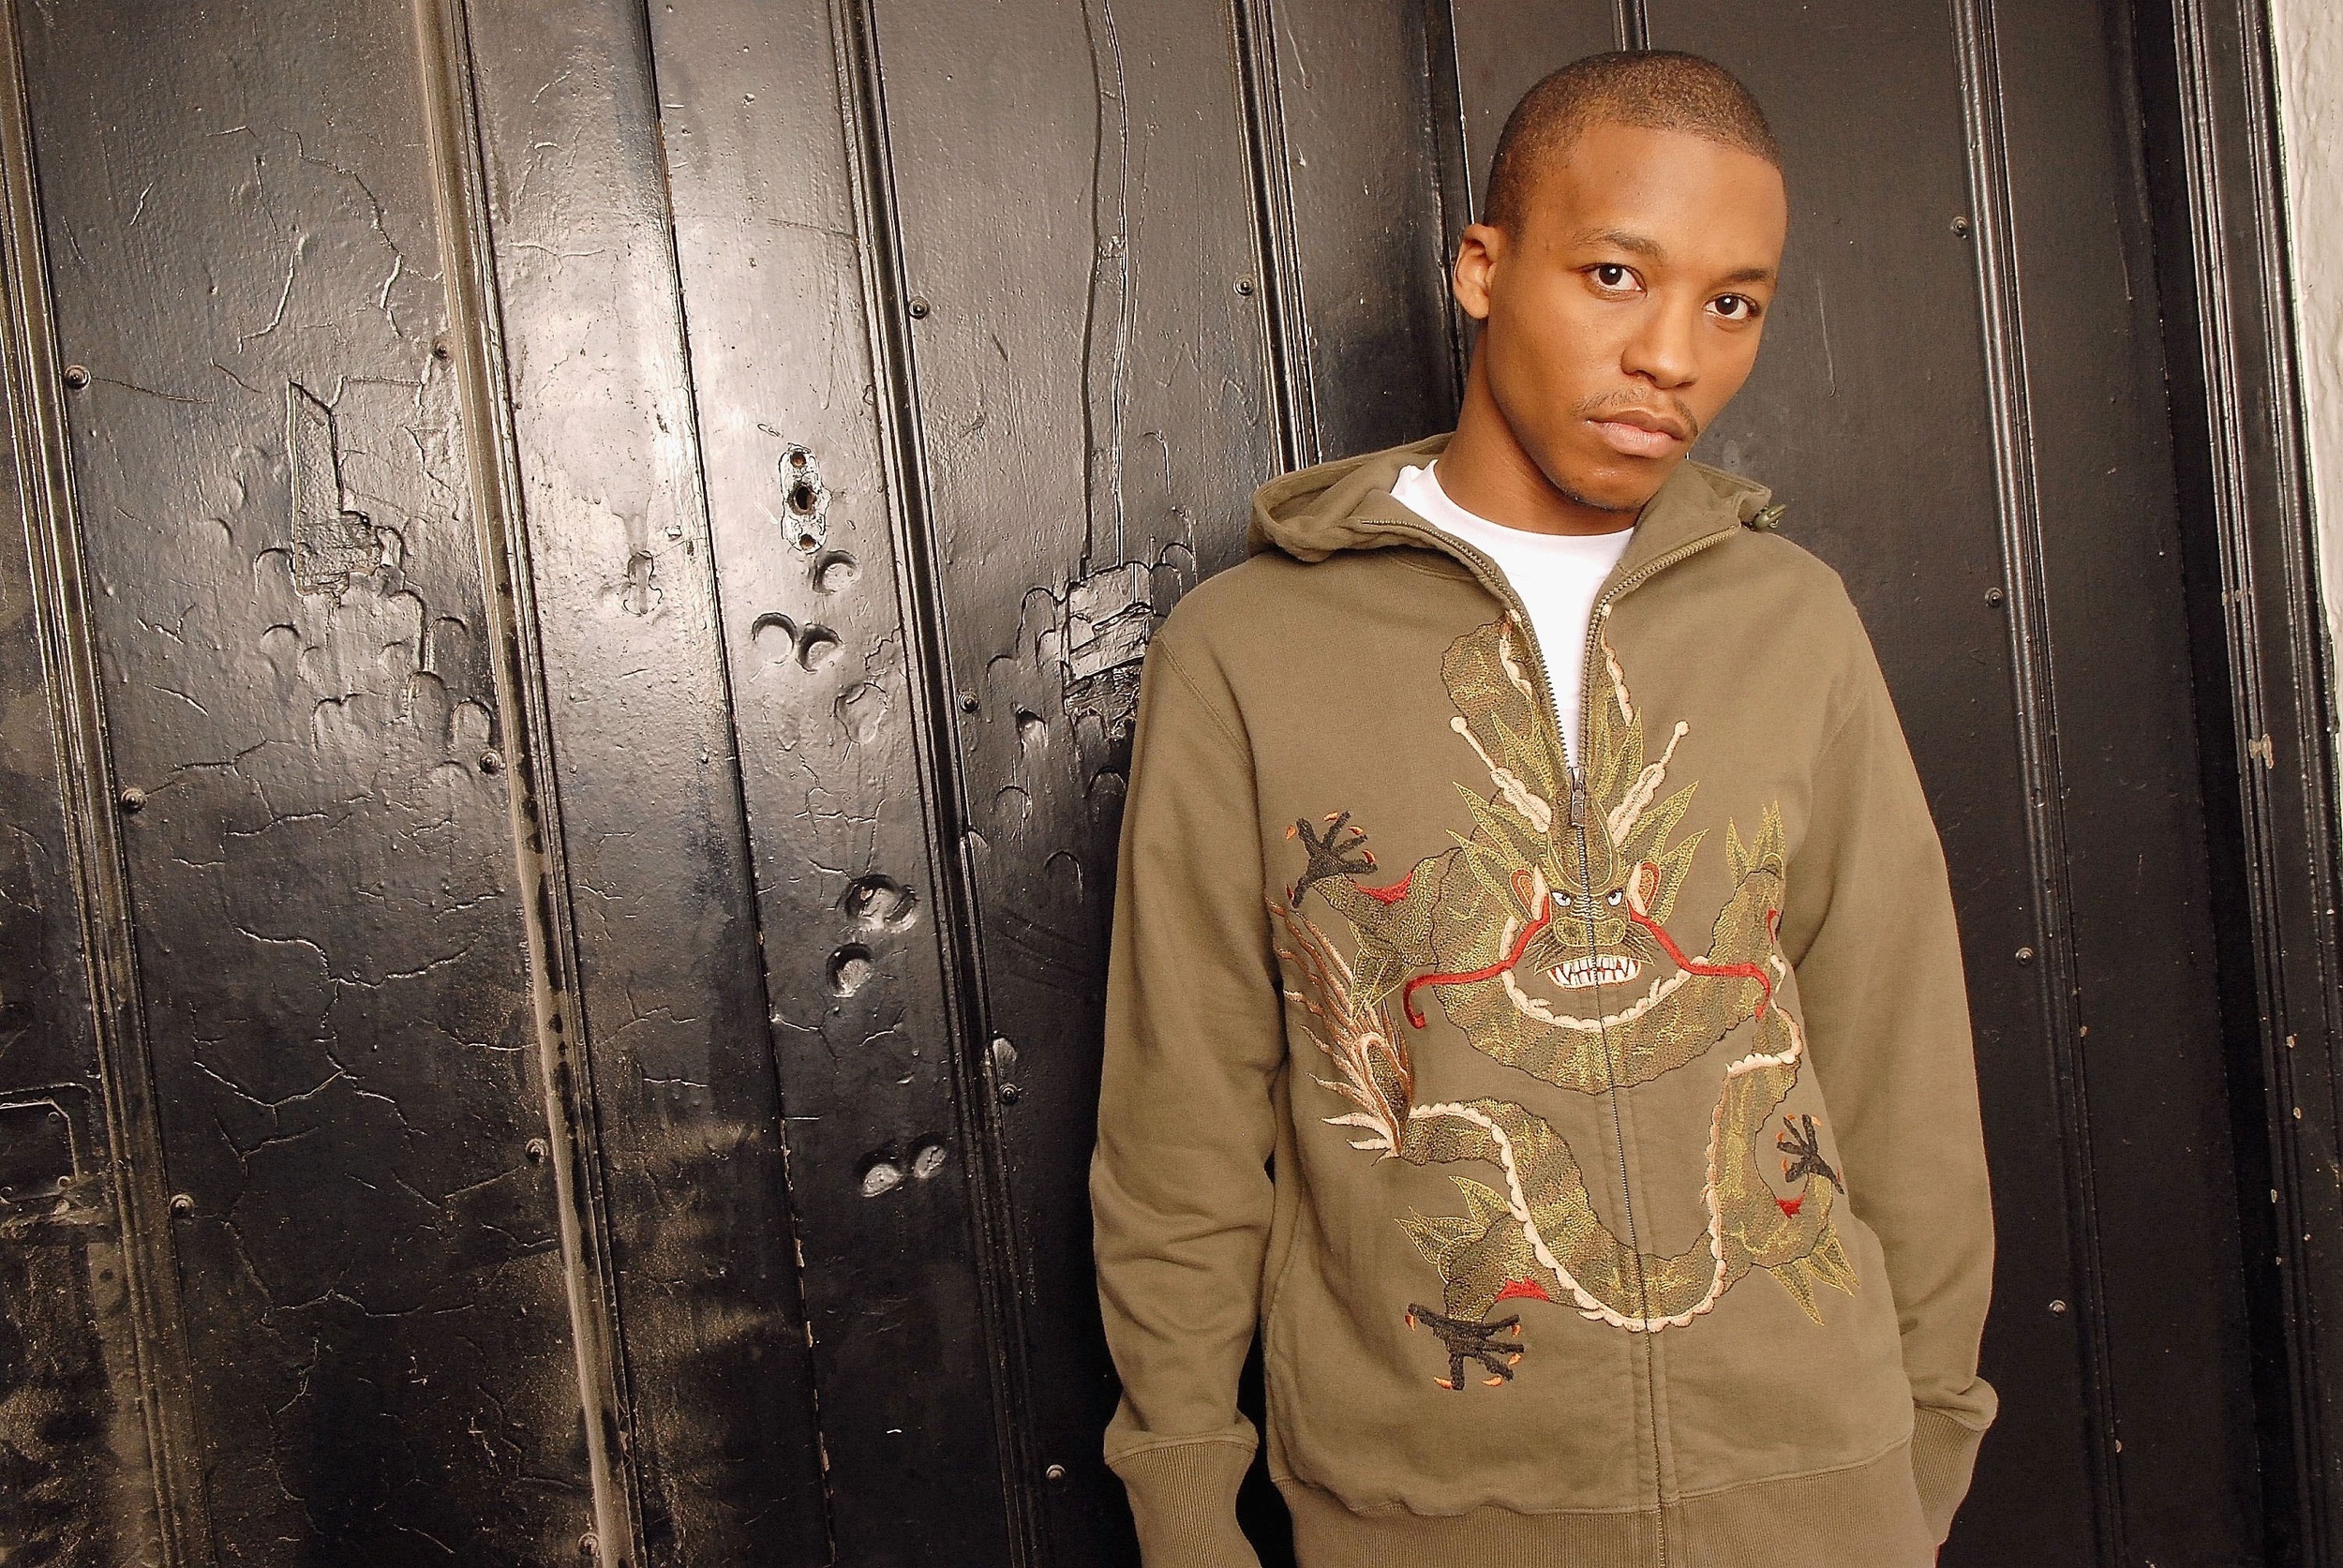 <p>2006 was Lupe Fiasco's year, launching with the breezy, orchestral single "Kick, Push" and getting featured on Kanye West's "Touch the Sky," two events that worked in launching this previously unknown Chicago MC right to the front of the search engine results. The hype around rap's newest wunderkid was immense, and "Food & Liquor," his debut album, absolutely rose to the challenge. With a literate flow that felt like backpack rap done right, Lupe ended up working with everyone ranging from The Neptunes ("I Gotcha") to Mike Shinoda of Linkin Park (the surprisingly agile rock number "The Instrumental"). No matter what the production or guest on the song, Fiasco showed up and delivered, proving himself a nimble and adept lyricist — and then it just stopped. Following "Food & Liquor," Lupe dropped obvious rock hits, pop attempts that shamelessly quoted Modest Mouse and a litany of albums that were confusing and artistically frustrating. It had gotten so bad that Lupe even tried to redeem himself with an album called "Food & Liquor II" some six years after the first. While Lupe is fascinating, he is self-sabotaging as well, leaving a discography that is hotly debated and often dismissed — save for this one utterly stellar debut effort.</p><p><a href='https://www.msn.com/en-us/community/channel/vid-cj9pqbr0vn9in2b6ddcd8sfgpfq6x6utp44fssrv6mc2gtybw0us'>Follow us on MSN to see more of our exclusive entertainment content.</a></p>